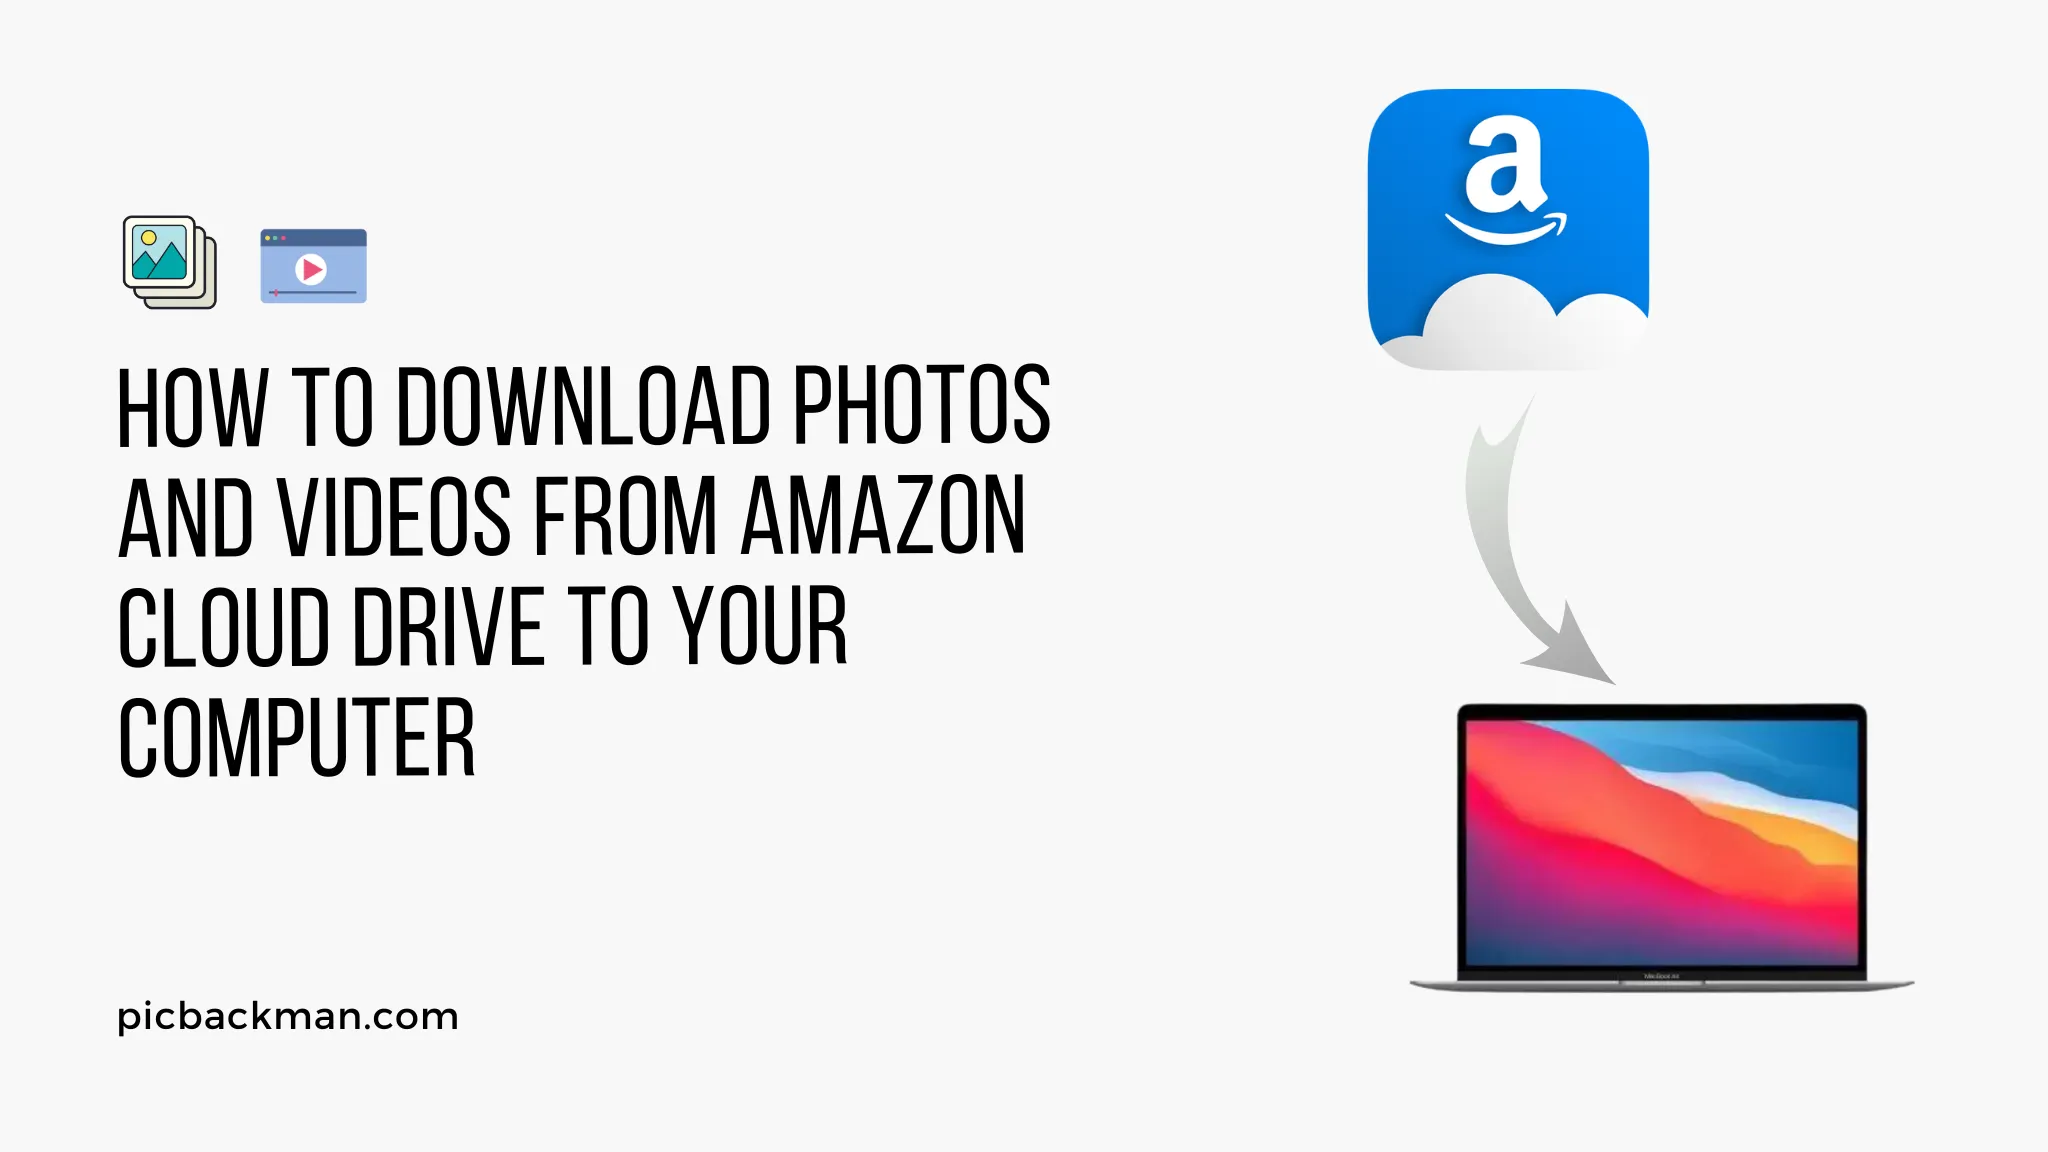 How to Download Photos and Videos from Amazon Cloud Drive to Your Computer